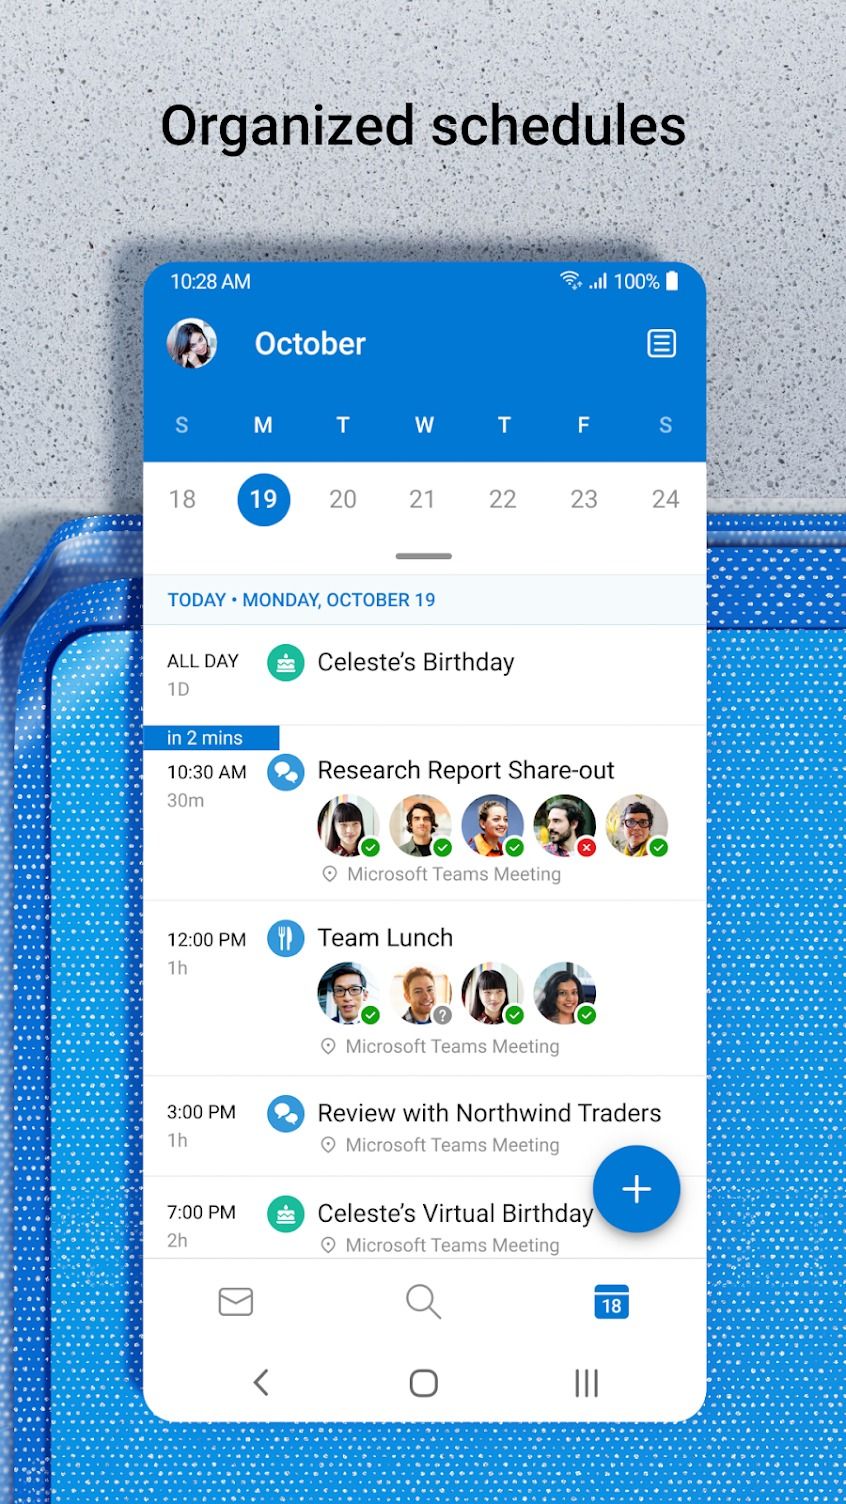 The schedules page on the Microsoft Outlook email app.